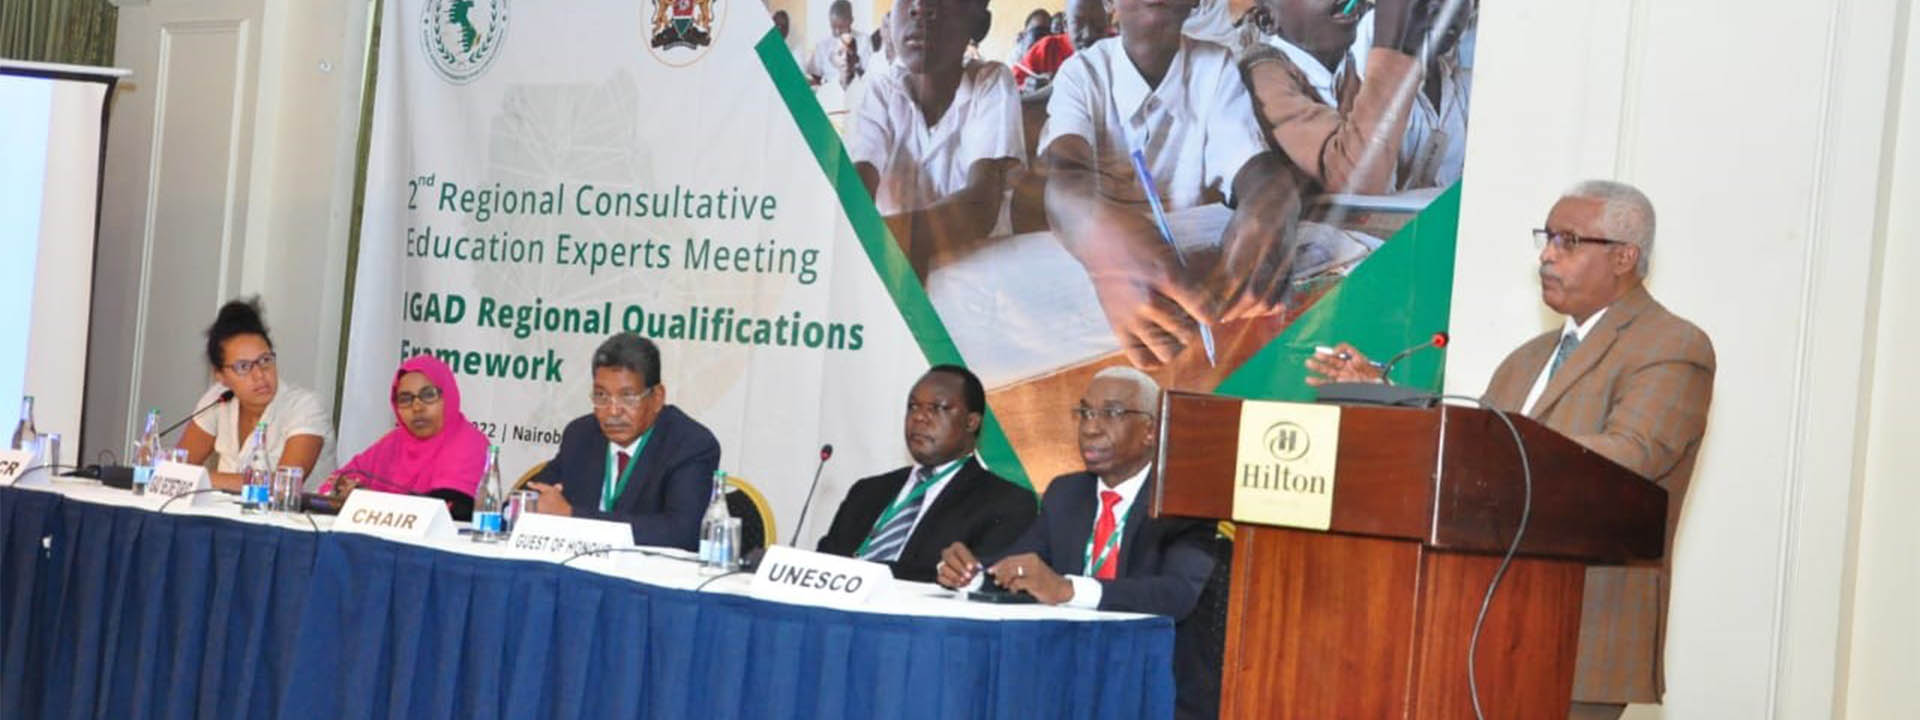 IGAD Opened the Second Regional Consultative Education Experts Meeting on Qualifications Framework